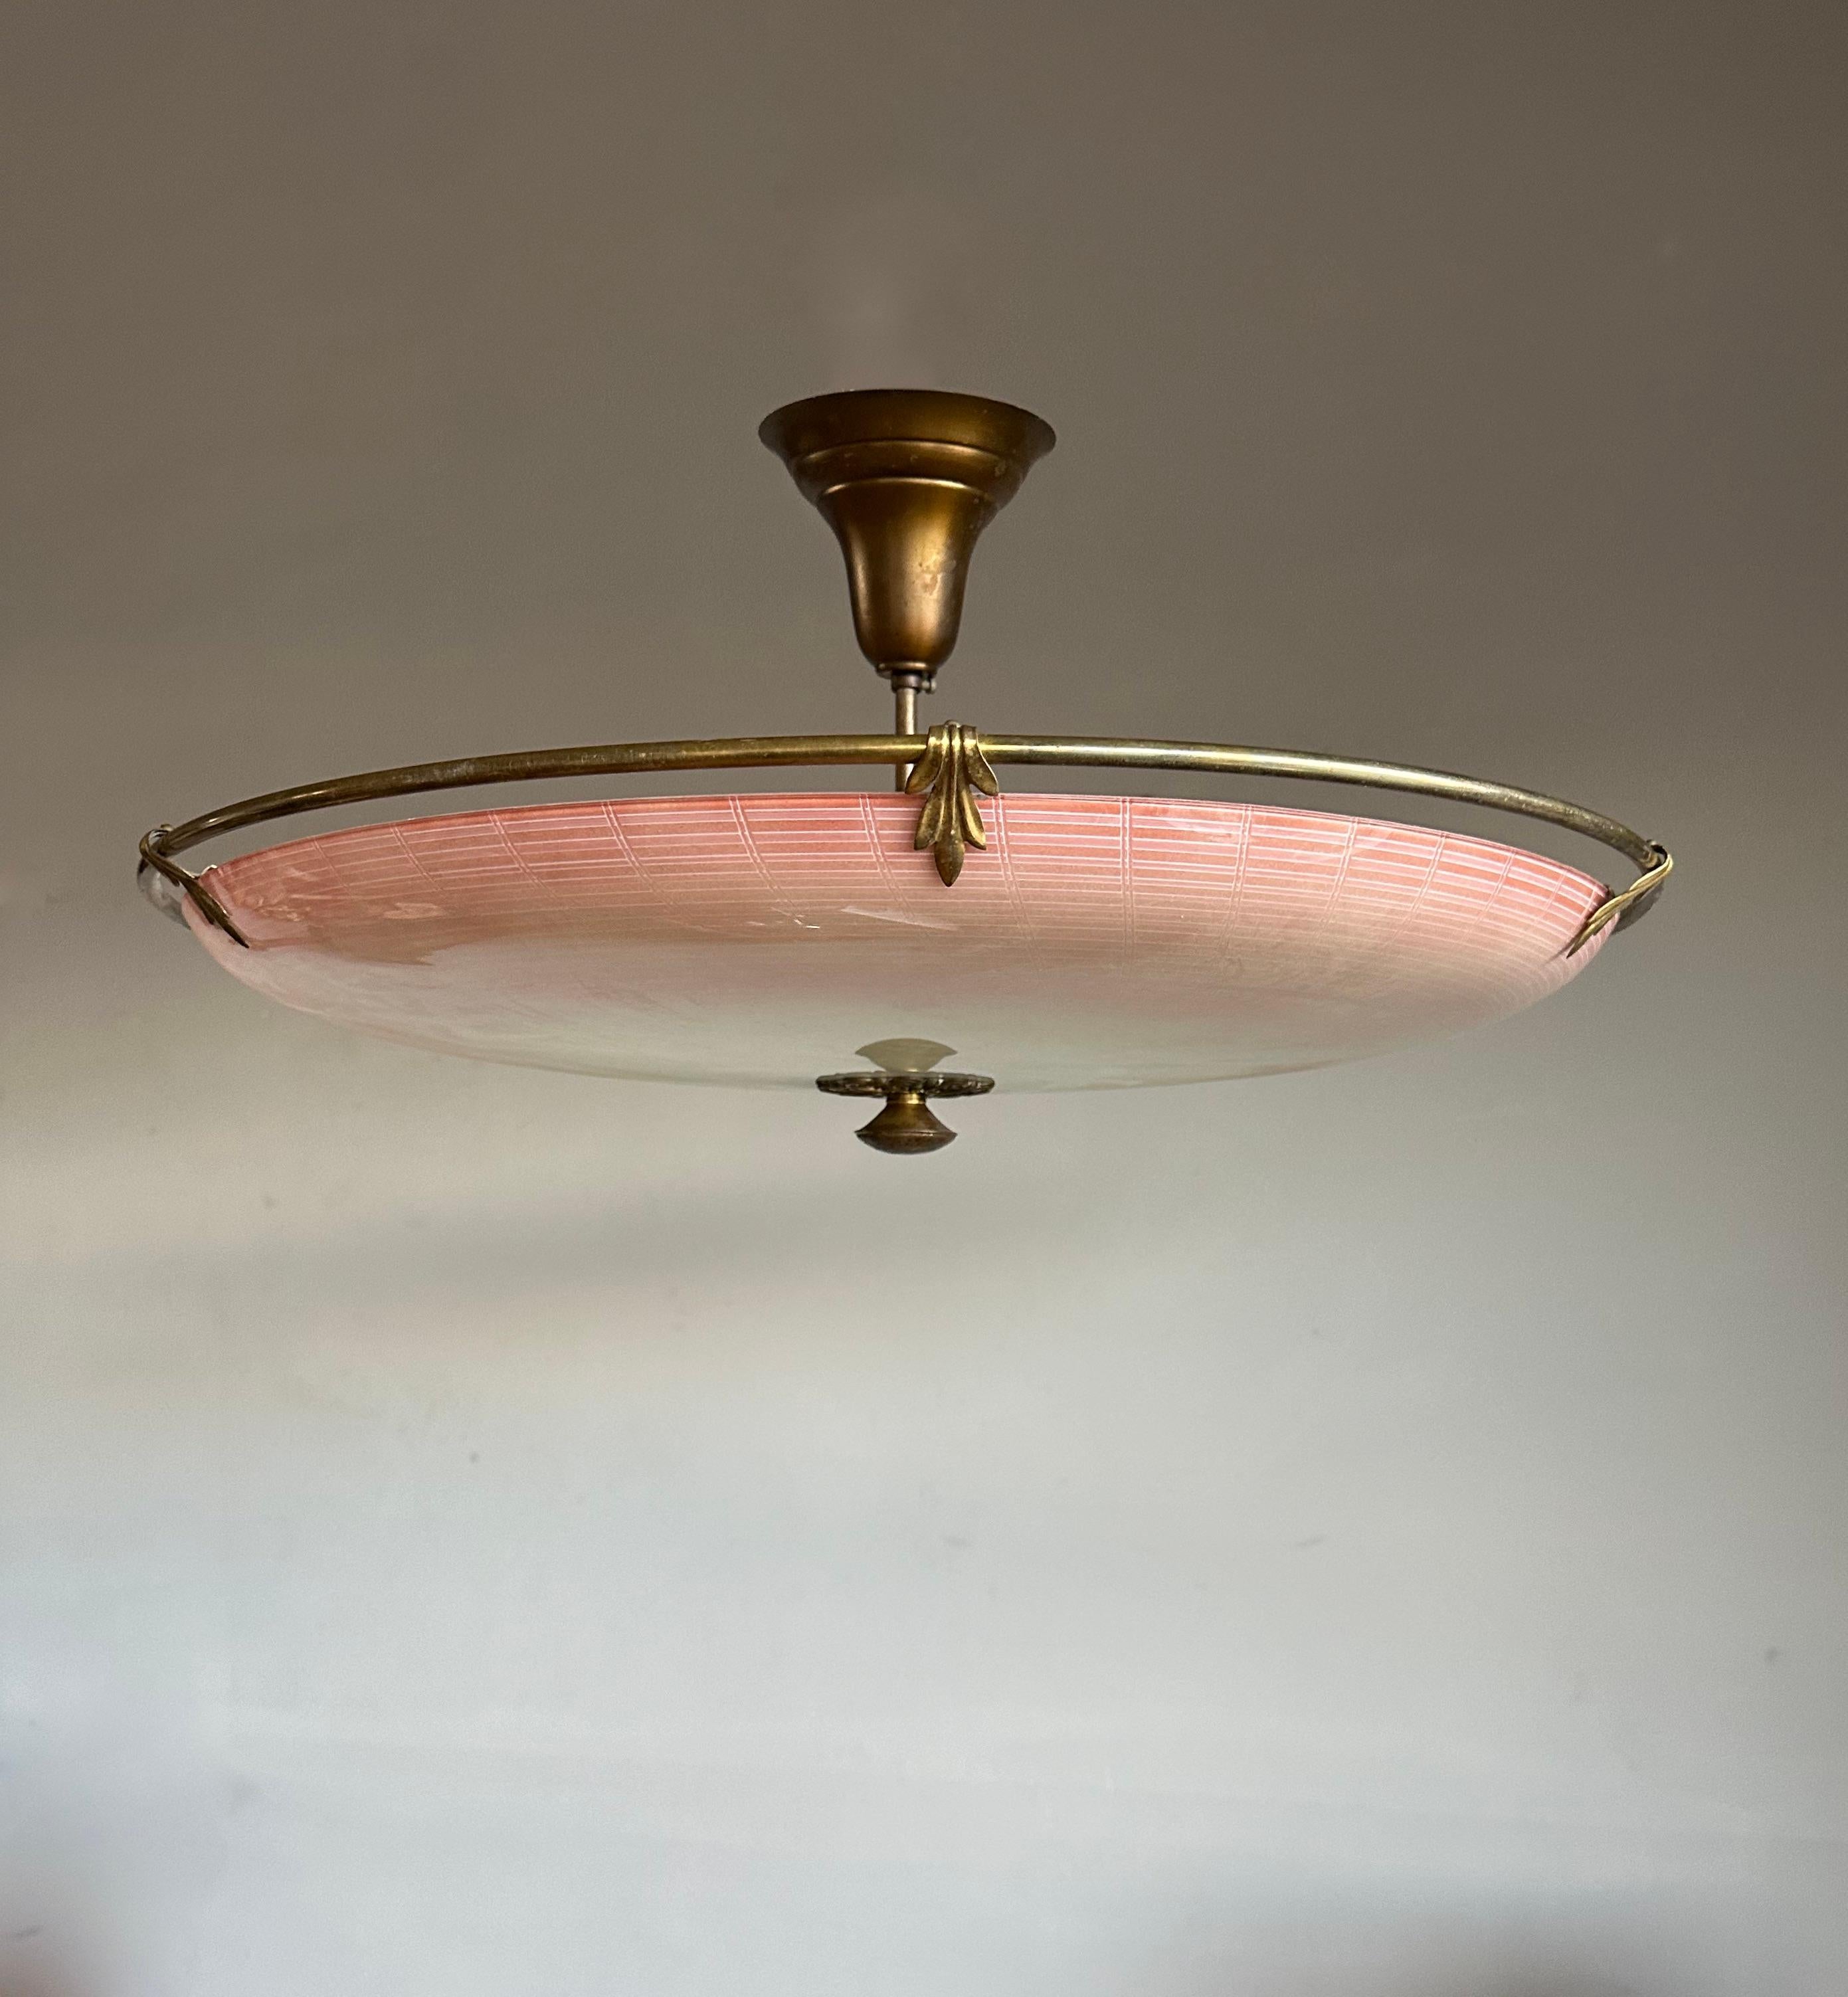 This extra large and pure Mid-Century Modern, three lights fixture is another one of our recent great finds. 

This unique light fixture from the mid twentieth century era has a beautiful look and feel and you will hardly ever find a light fixture